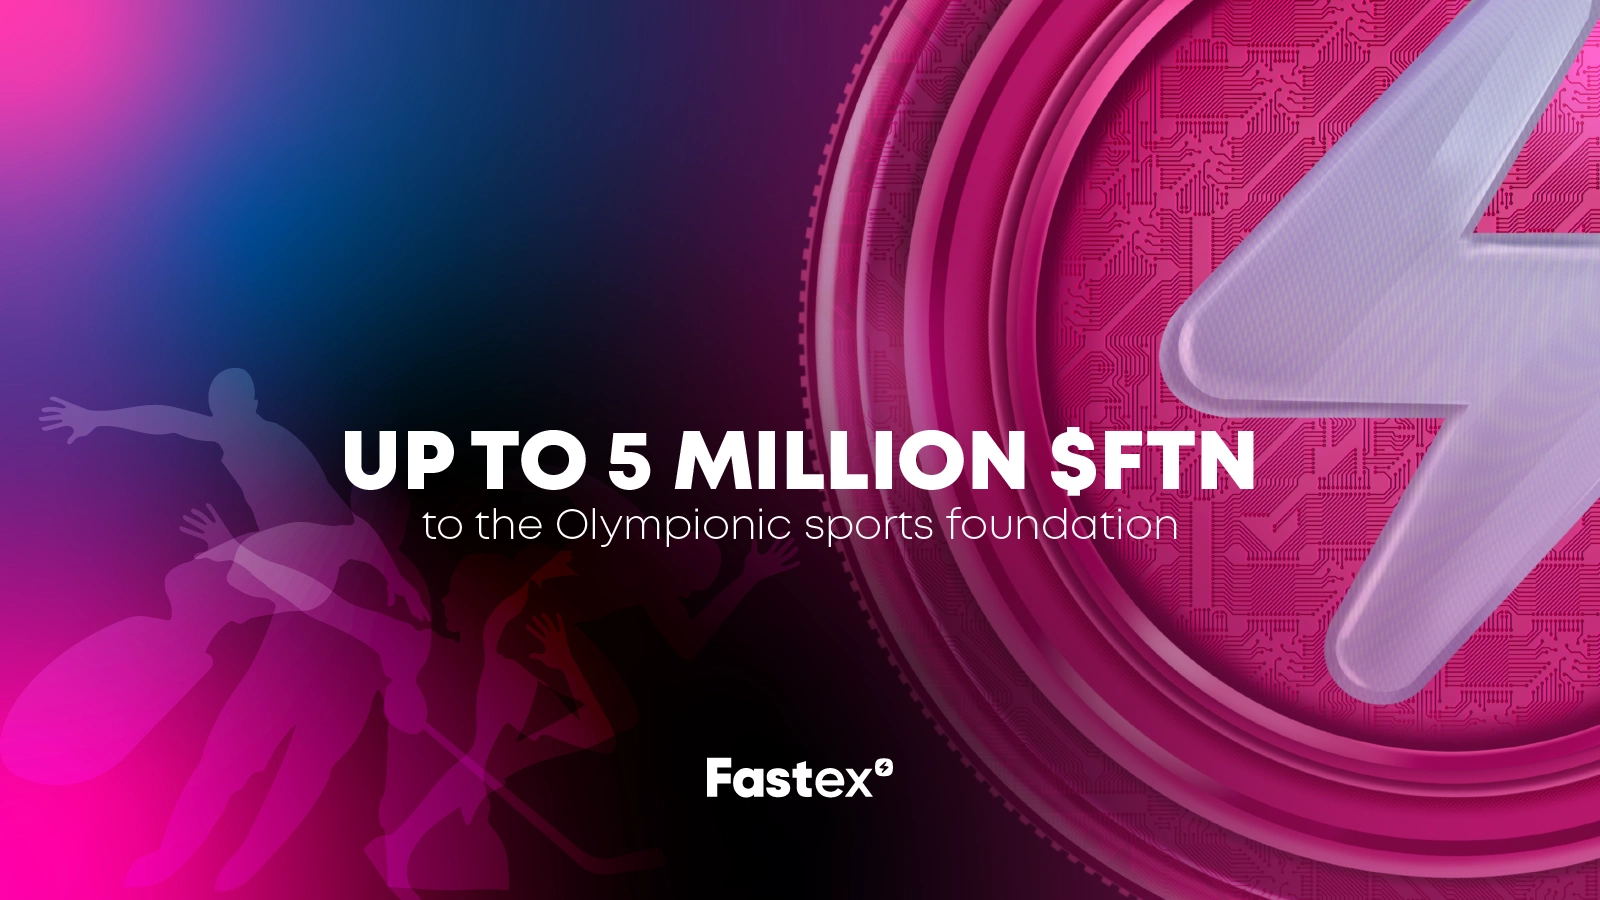 Fastex will provide up to 5 million $FTN to the “Olympionic” sports foundation. 